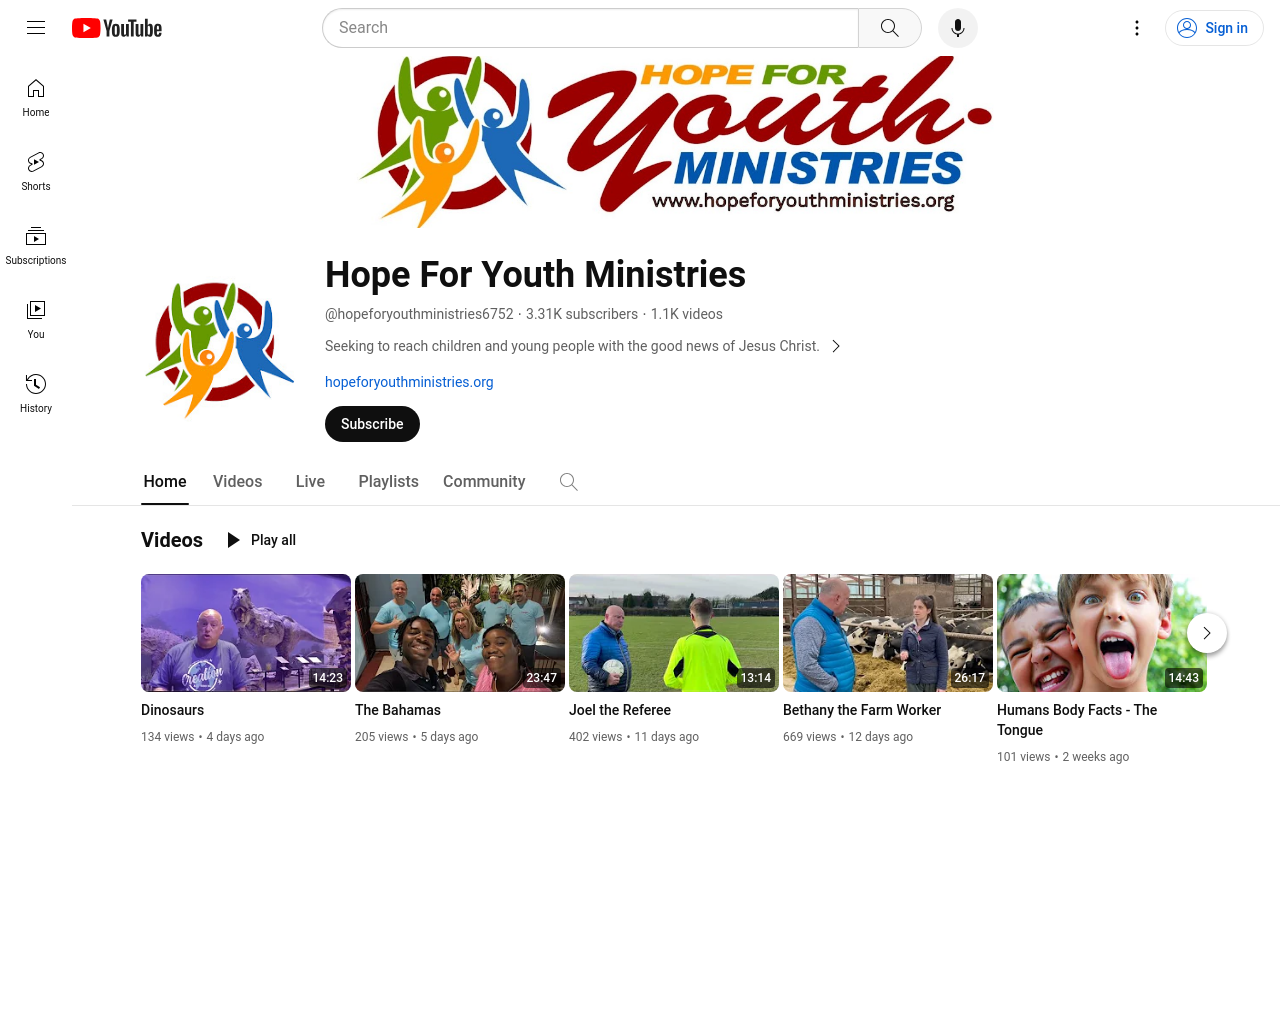 Hope For Youth Ministries